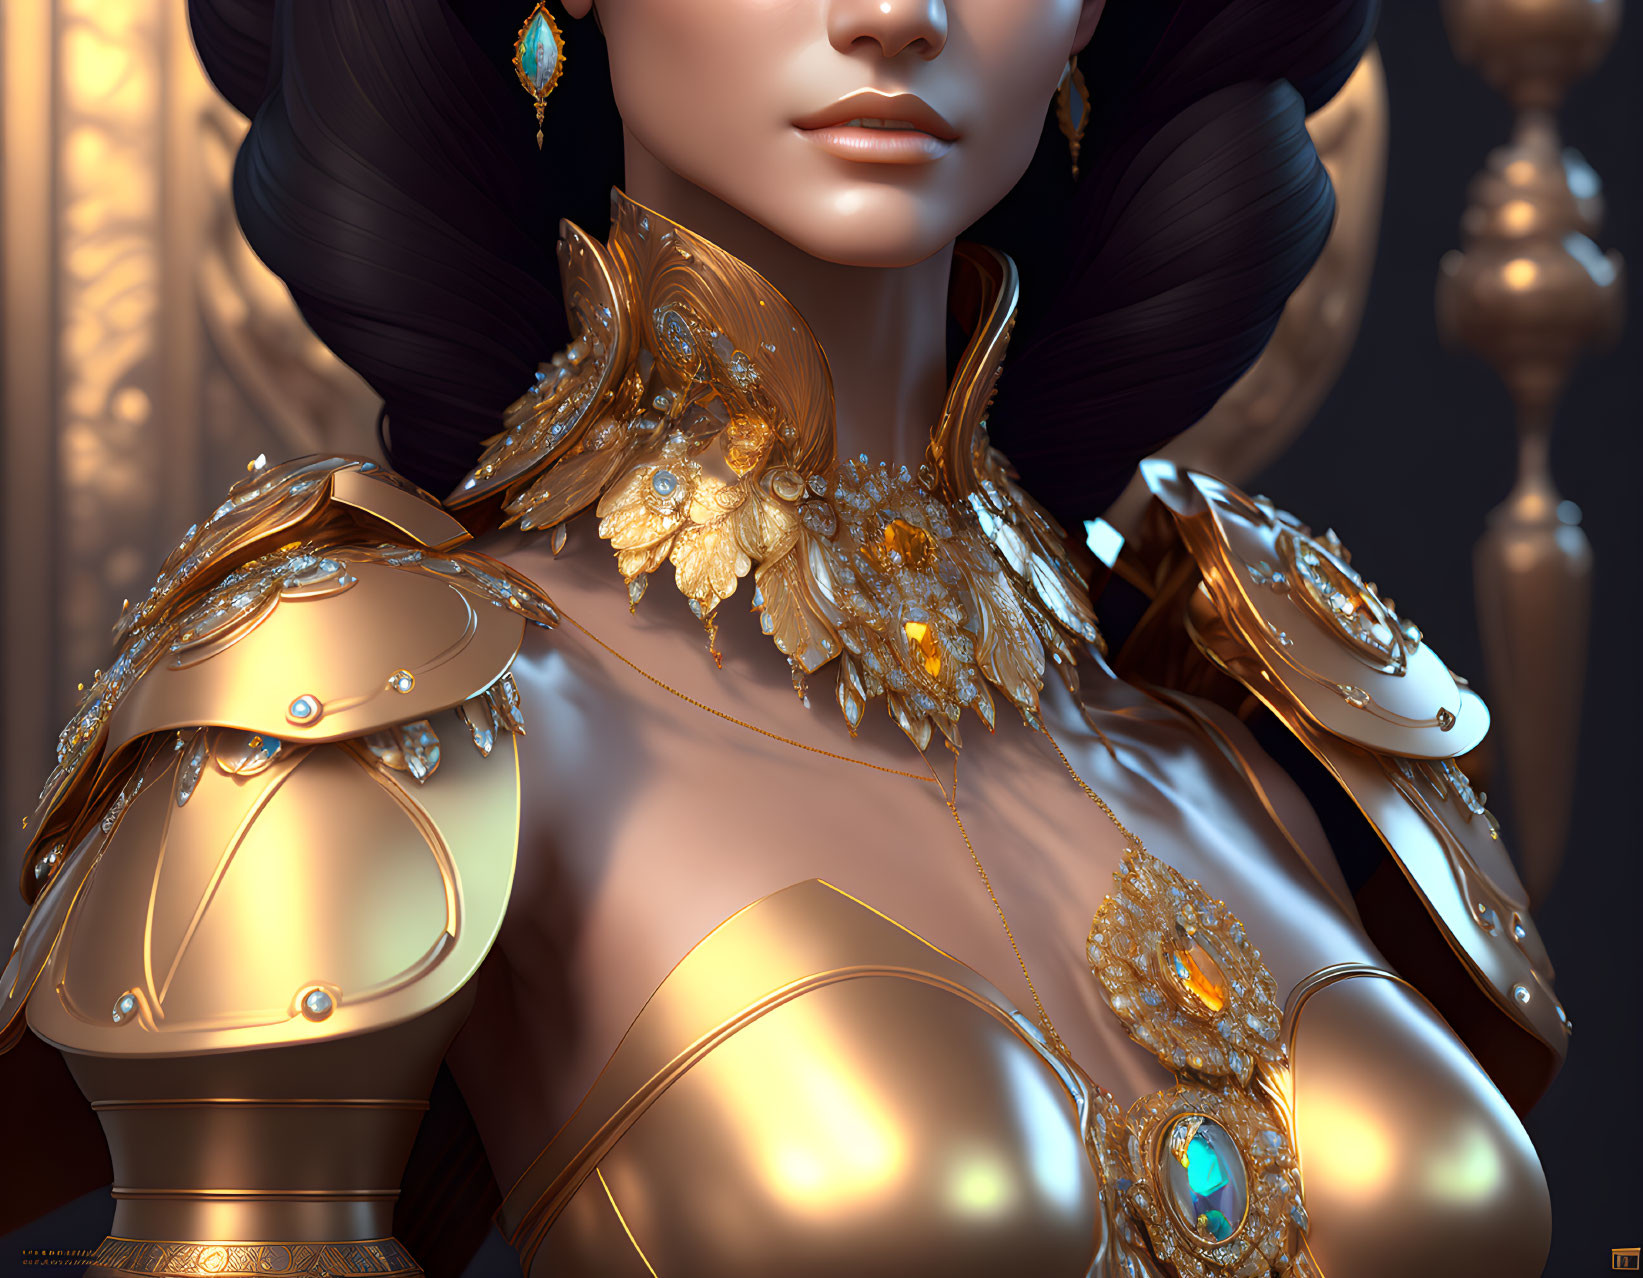 Detailed digital art portrait: person in ornate gold armor with intricate designs and gemstones on shoulders and